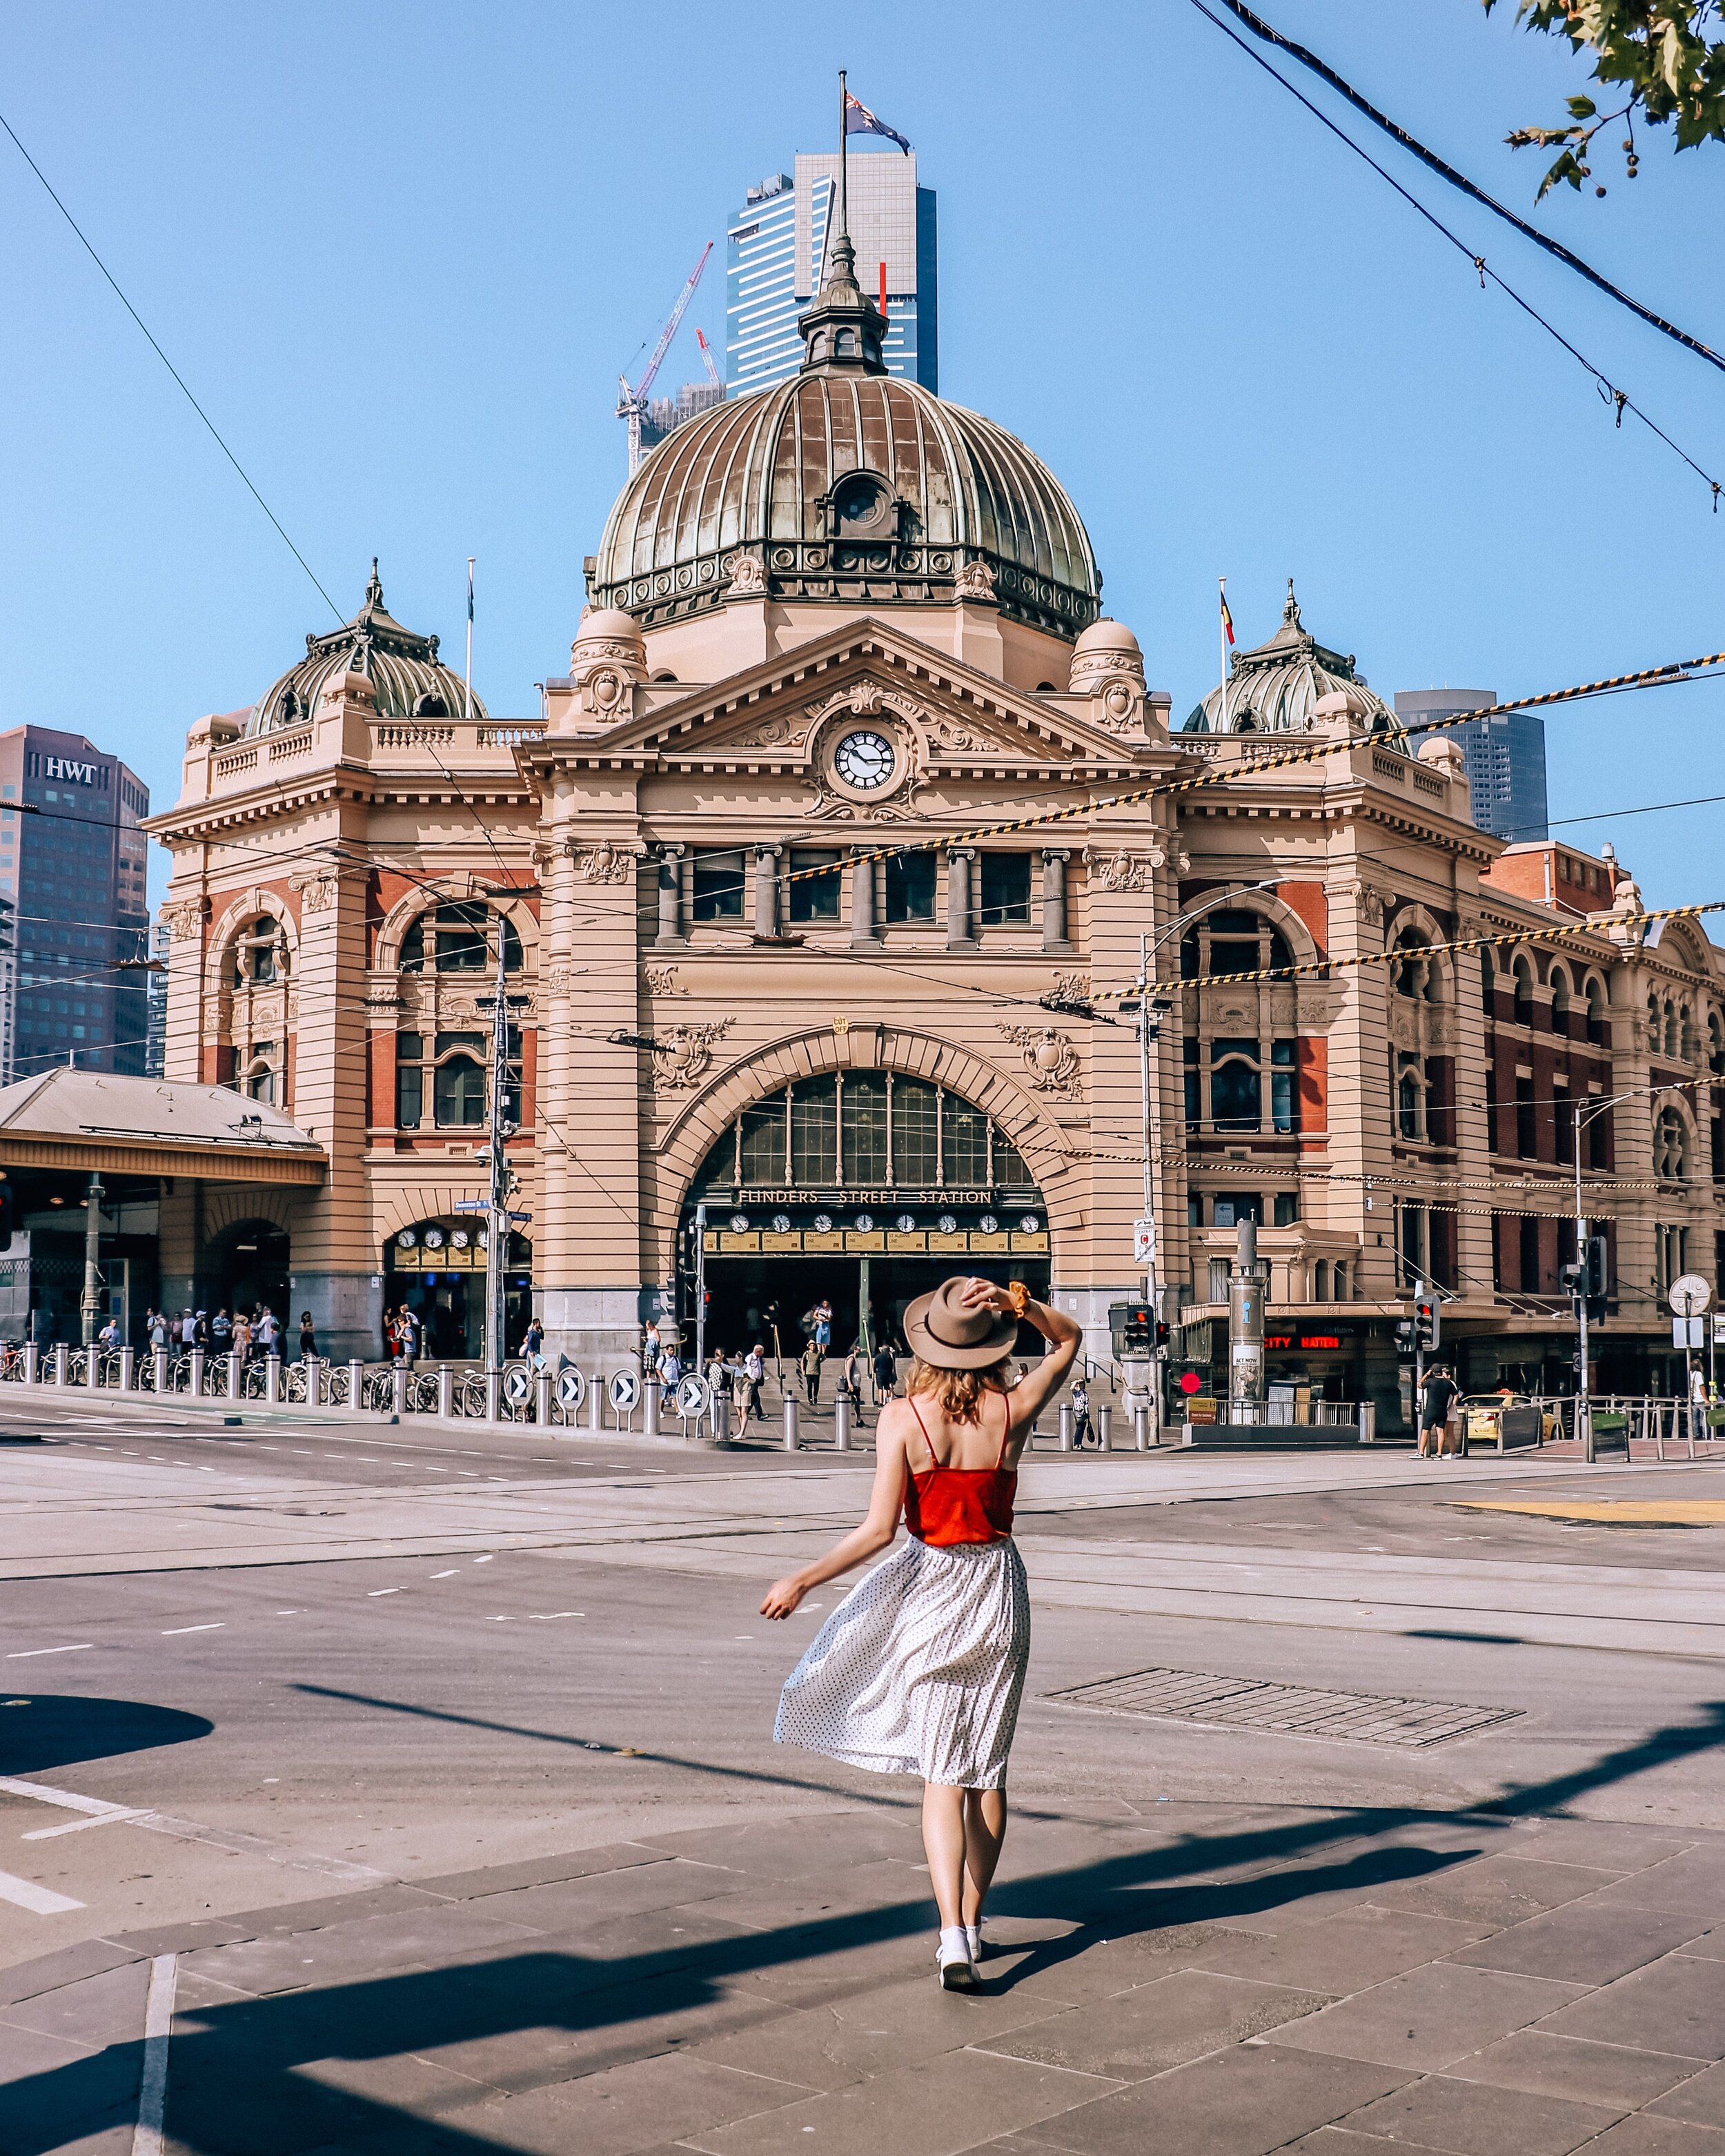 3 Days in Melbourne itinerary | Helena Bradbury Travel Blog | Melbourne Itinerary 3 days | How to spend 3 days in Melbourne | Melbourne Australia Travel Guide | Melbourne Australia travel things to do | Melbourne blog | Melbourne victoria | Things t…